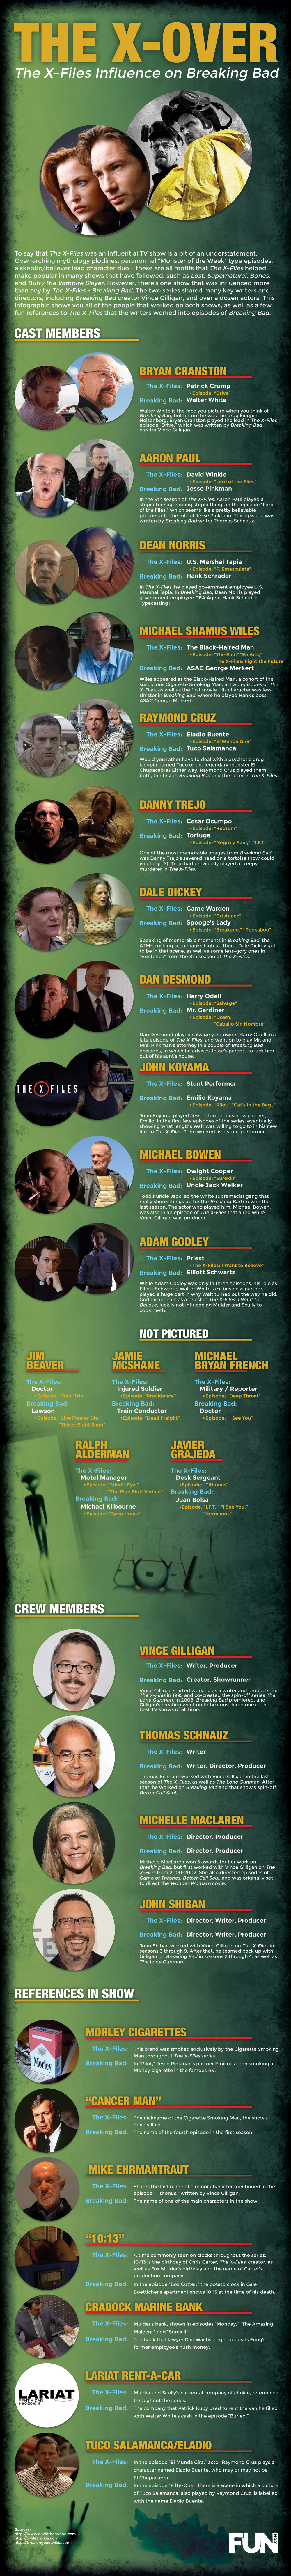 The X-Files Influence on Breaking Bad Infographic